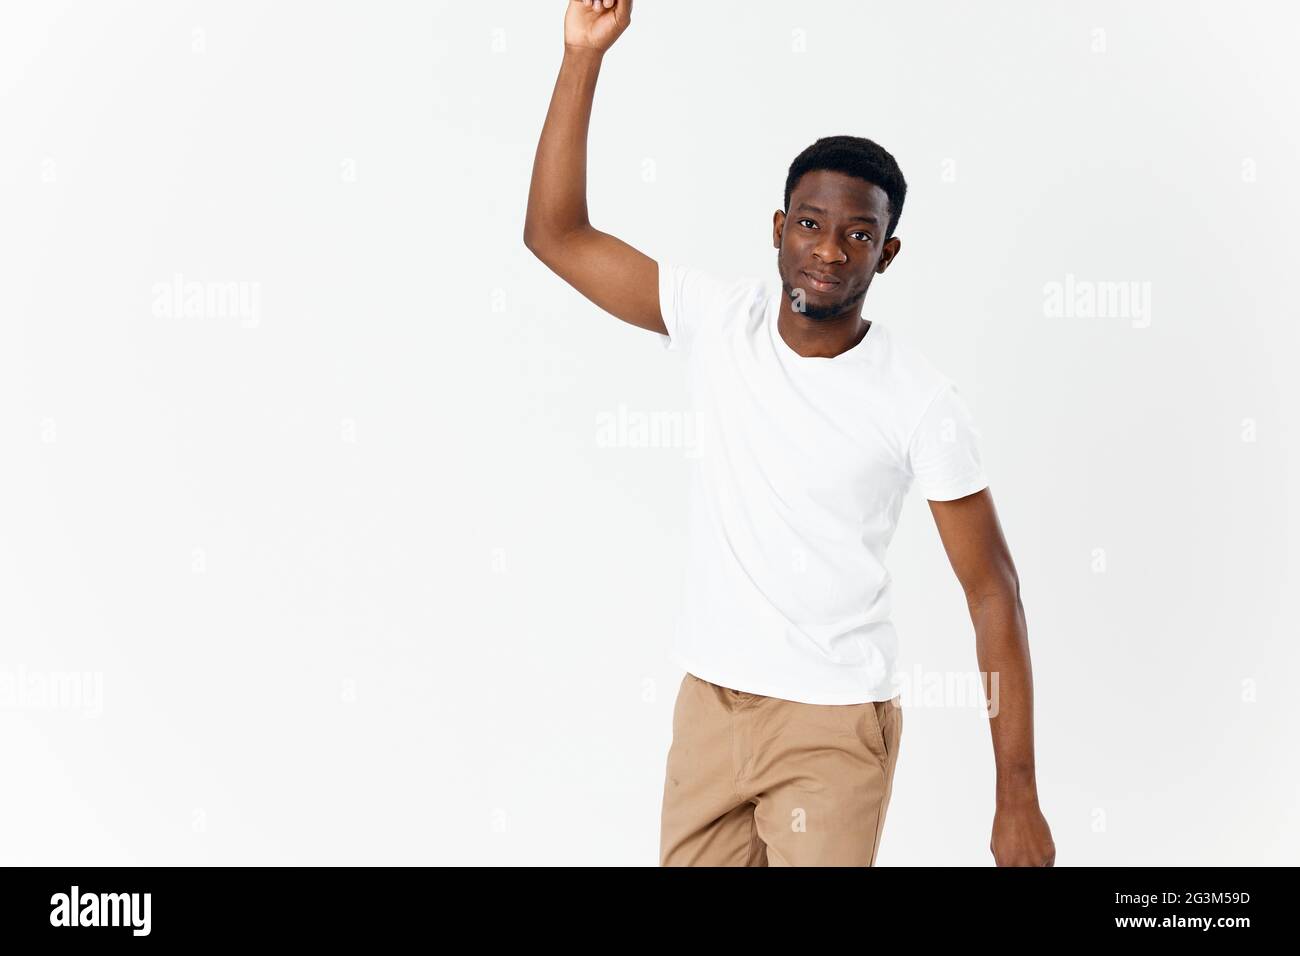 Man In White T-shirt Gesturing With Hands Casual Wear Studio Stock Photo